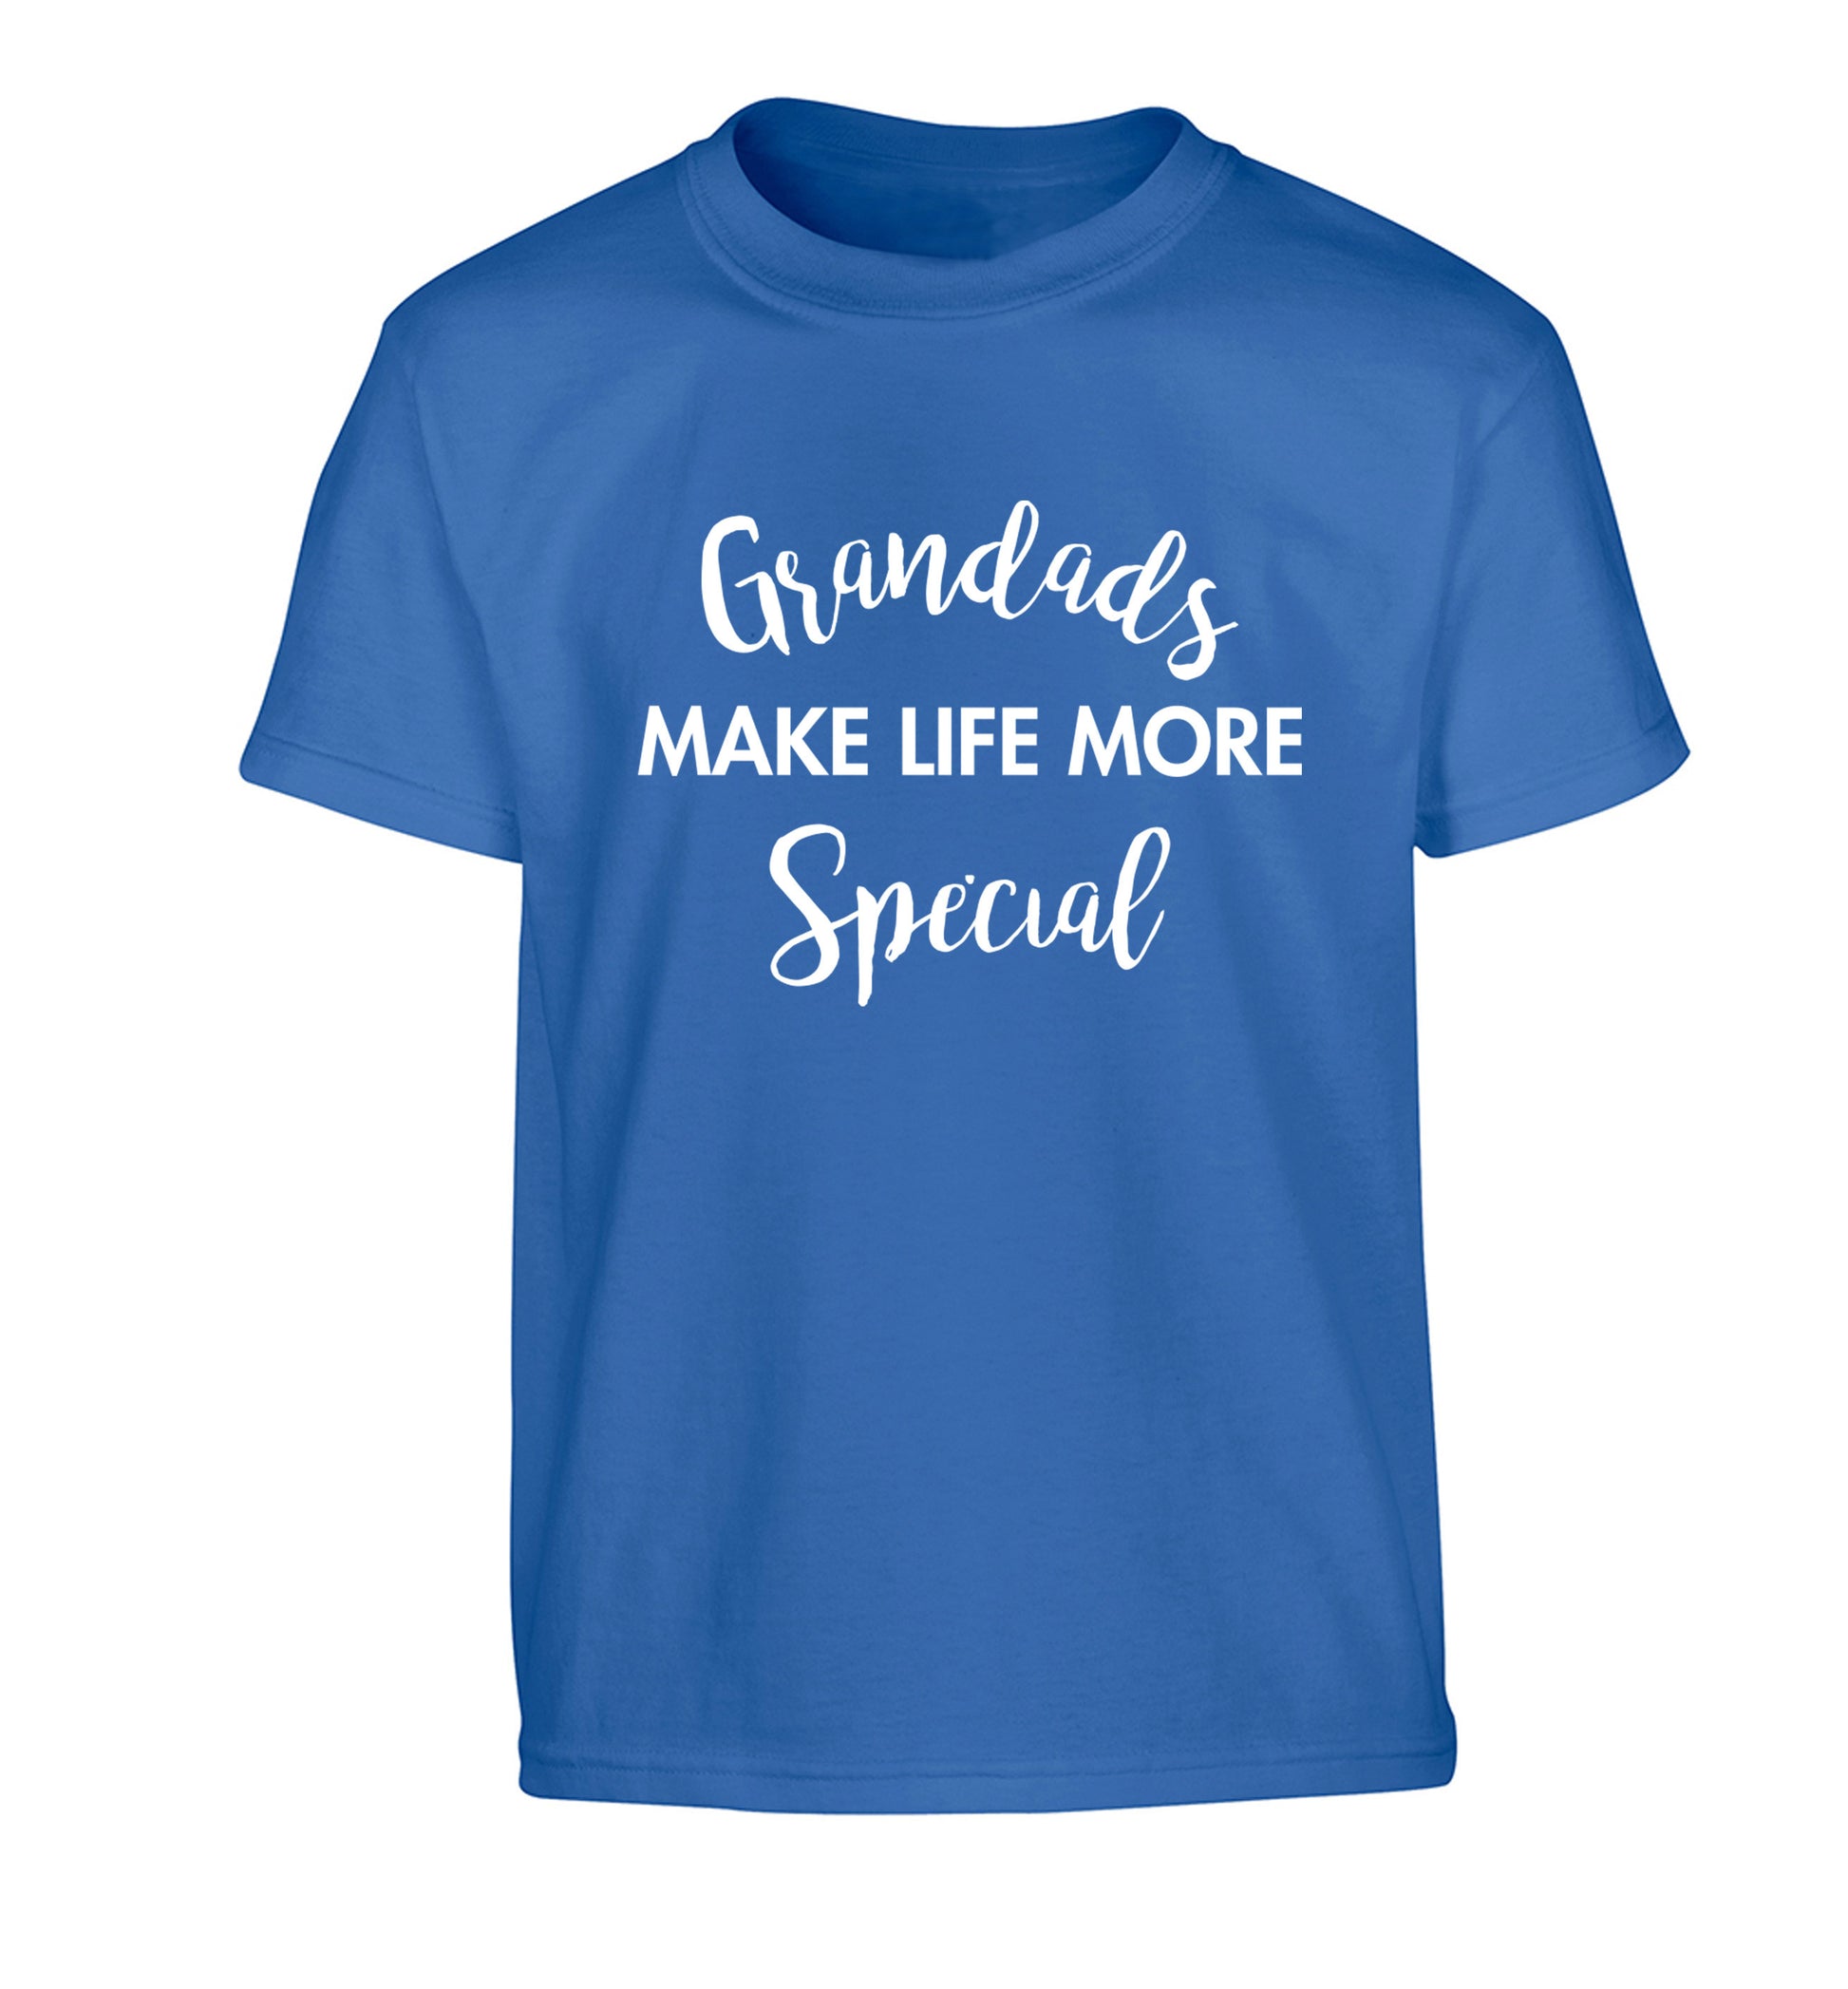 Grandads make life more special Children's blue Tshirt 12-14 Years